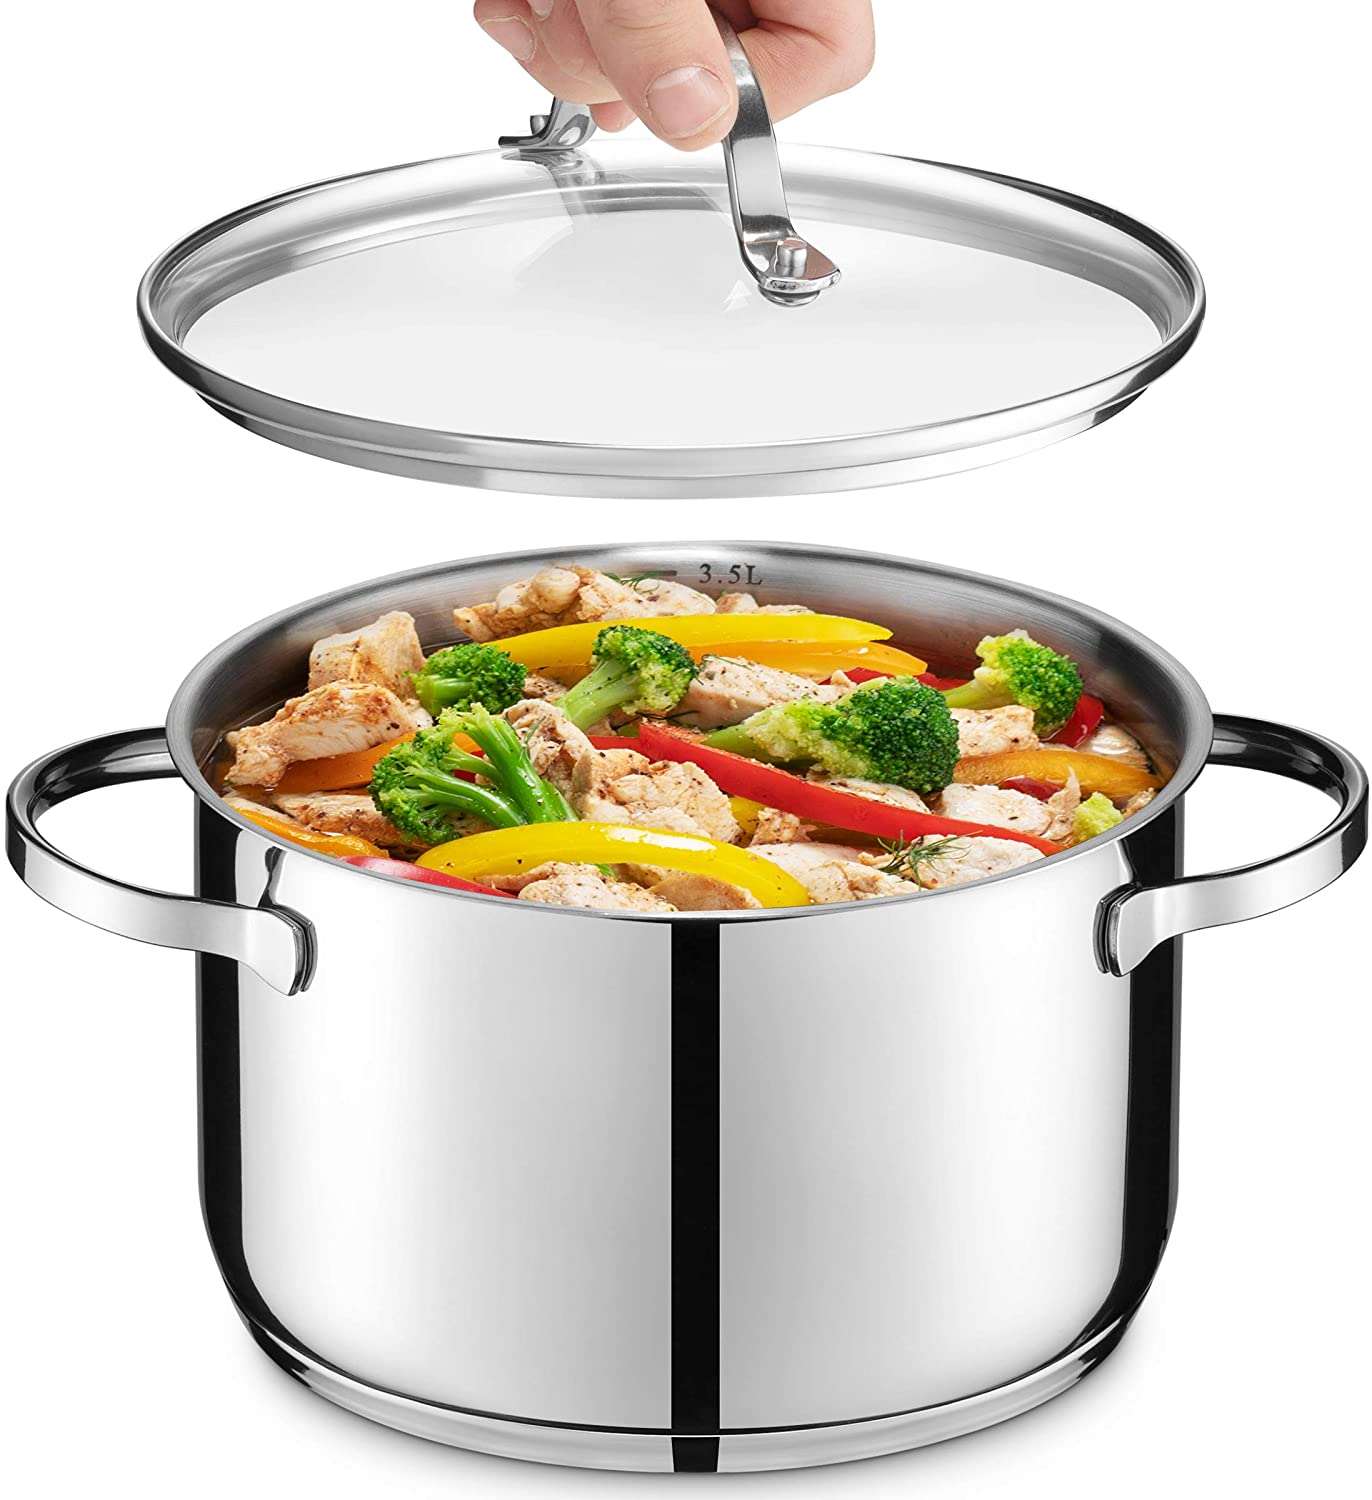 GOURMEX 14L Induction Stockpot Stainless Steel Pot with Glass Cookware Lid